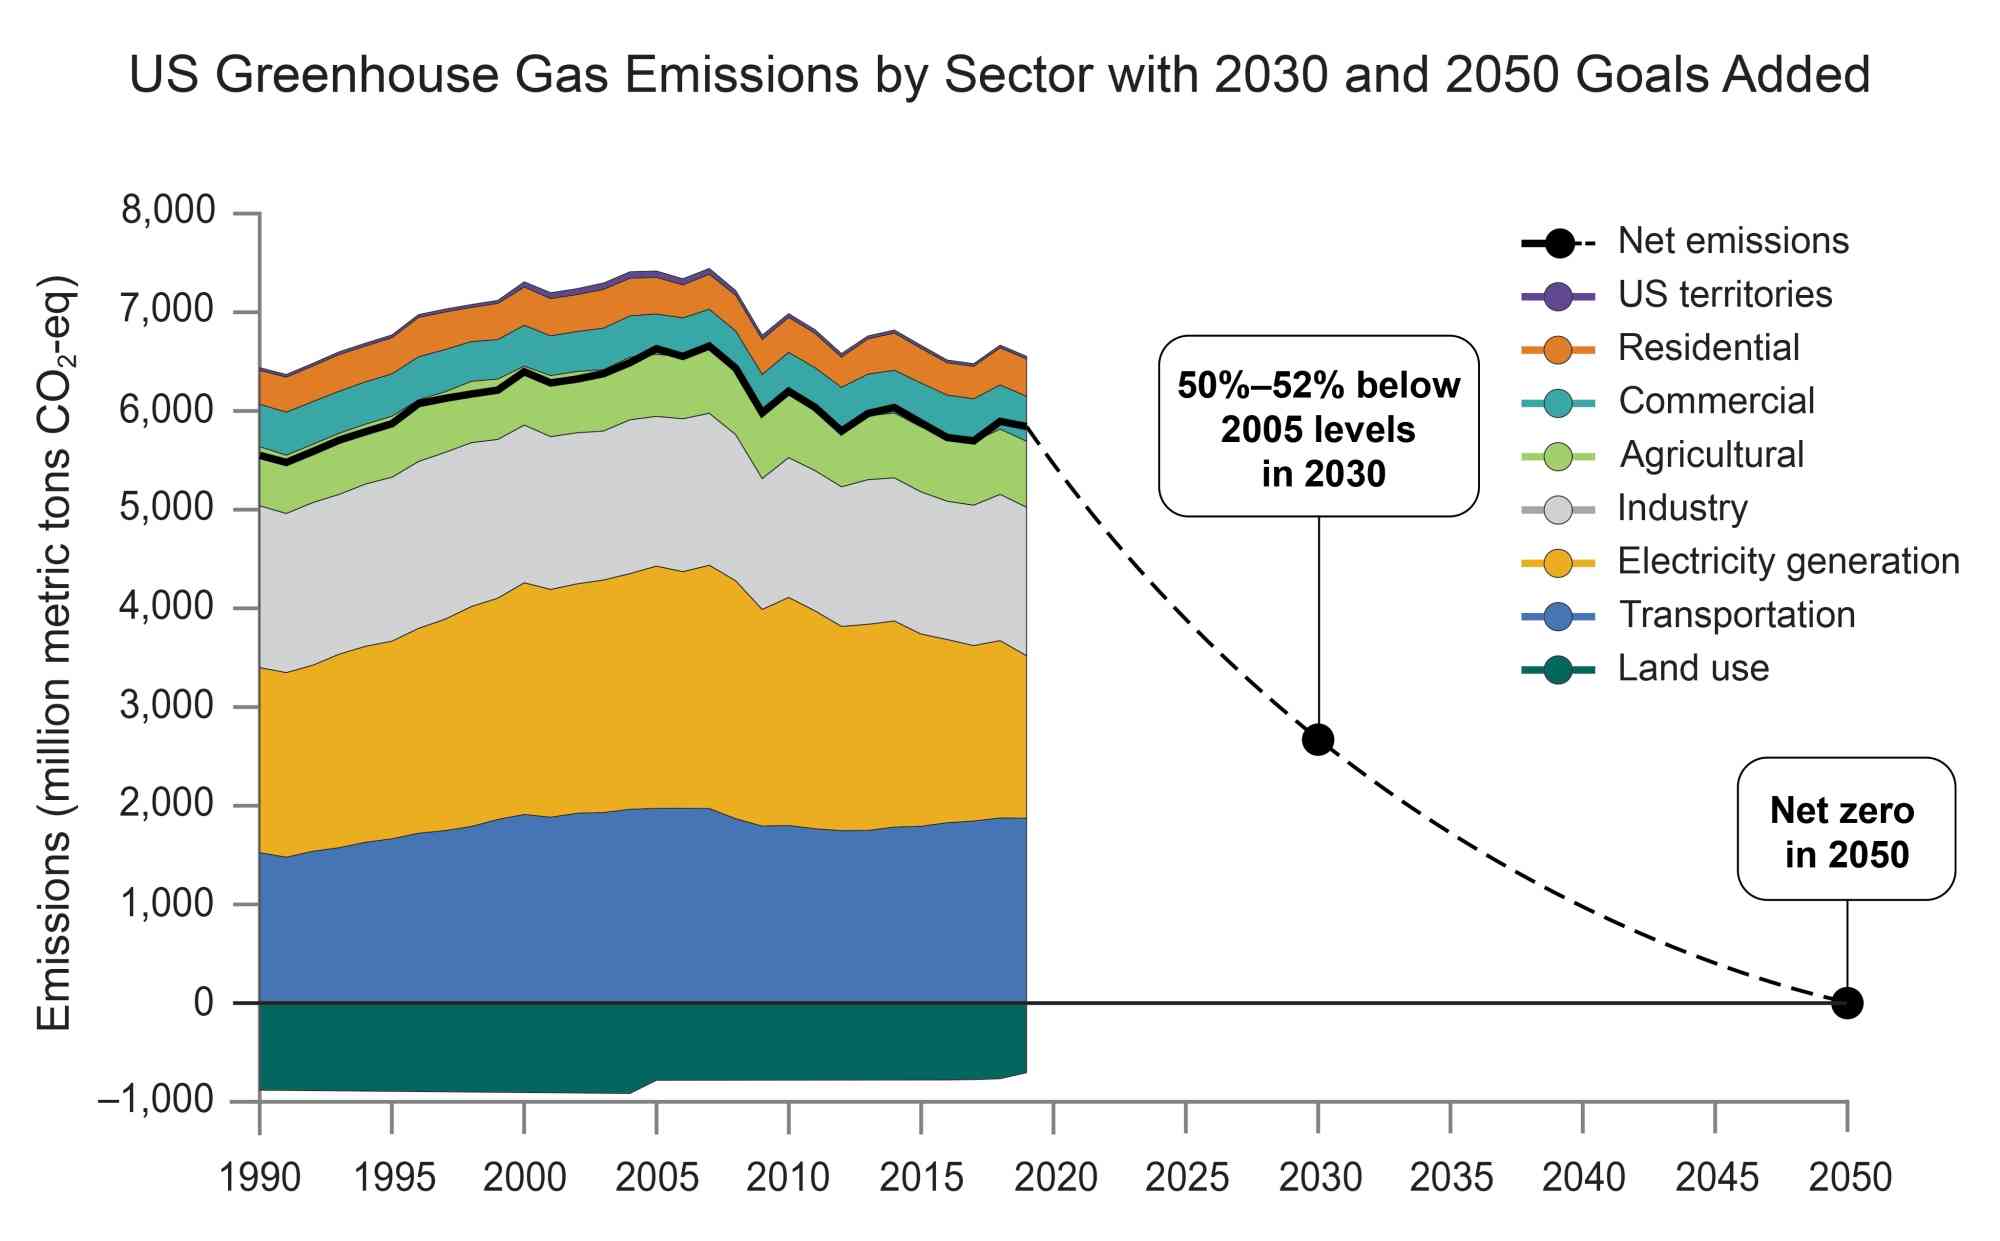 2024.01.11-US Greenhouse Gas Emissions by Sector with 2030 and 2050 Goals Added-Crimmins, A.R., C.W. Avery, D.R. Easterling, K.E. Kunkel, B.C. Stewart, and T.K. Maycock, Eds. U.S. Global Change Research Program